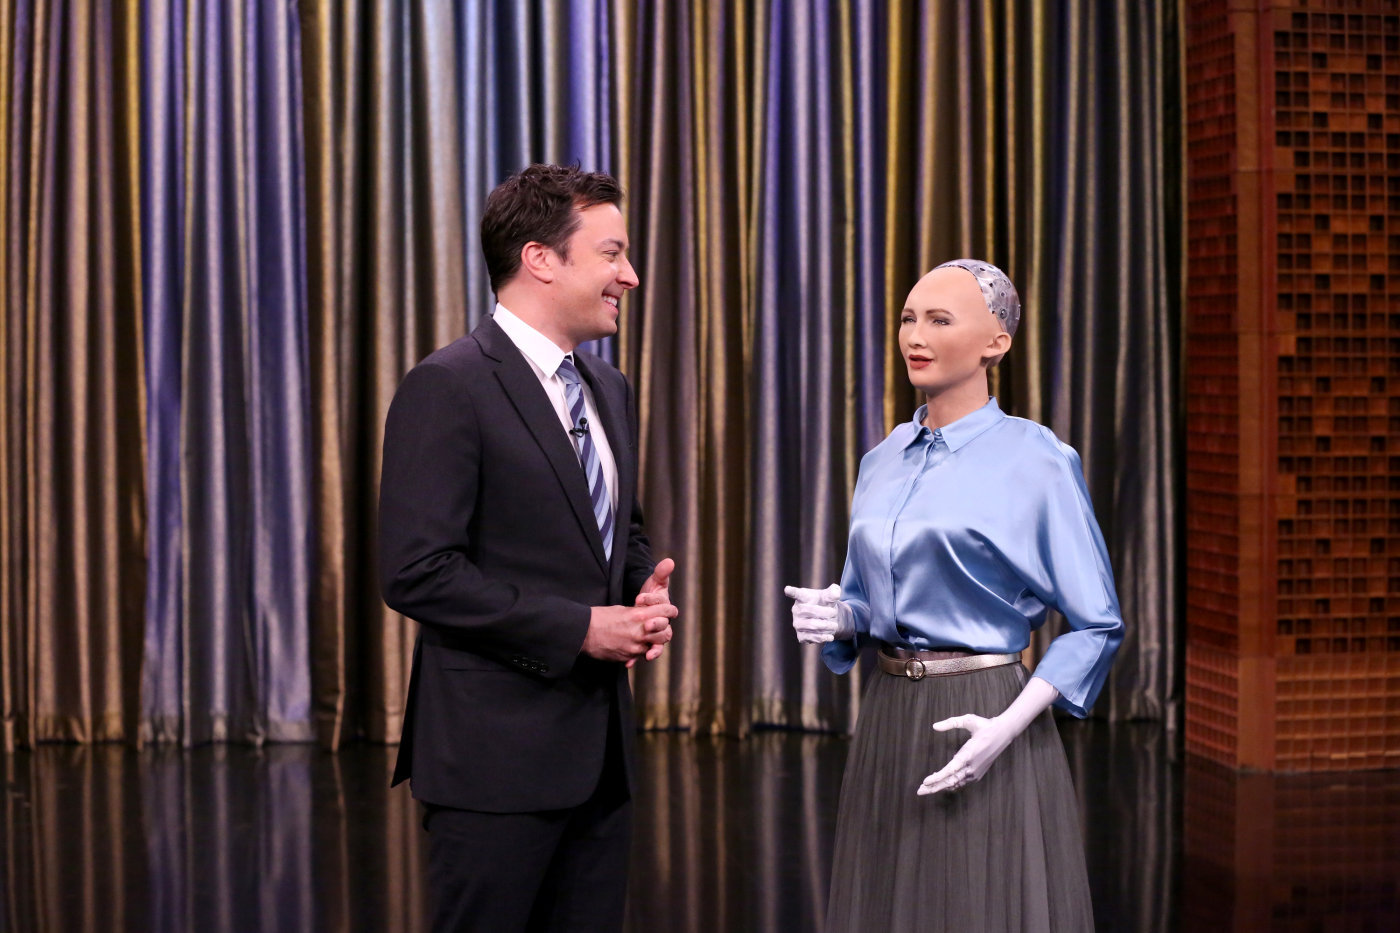 Catch humanoid robot 'Sophia' in Oman this month